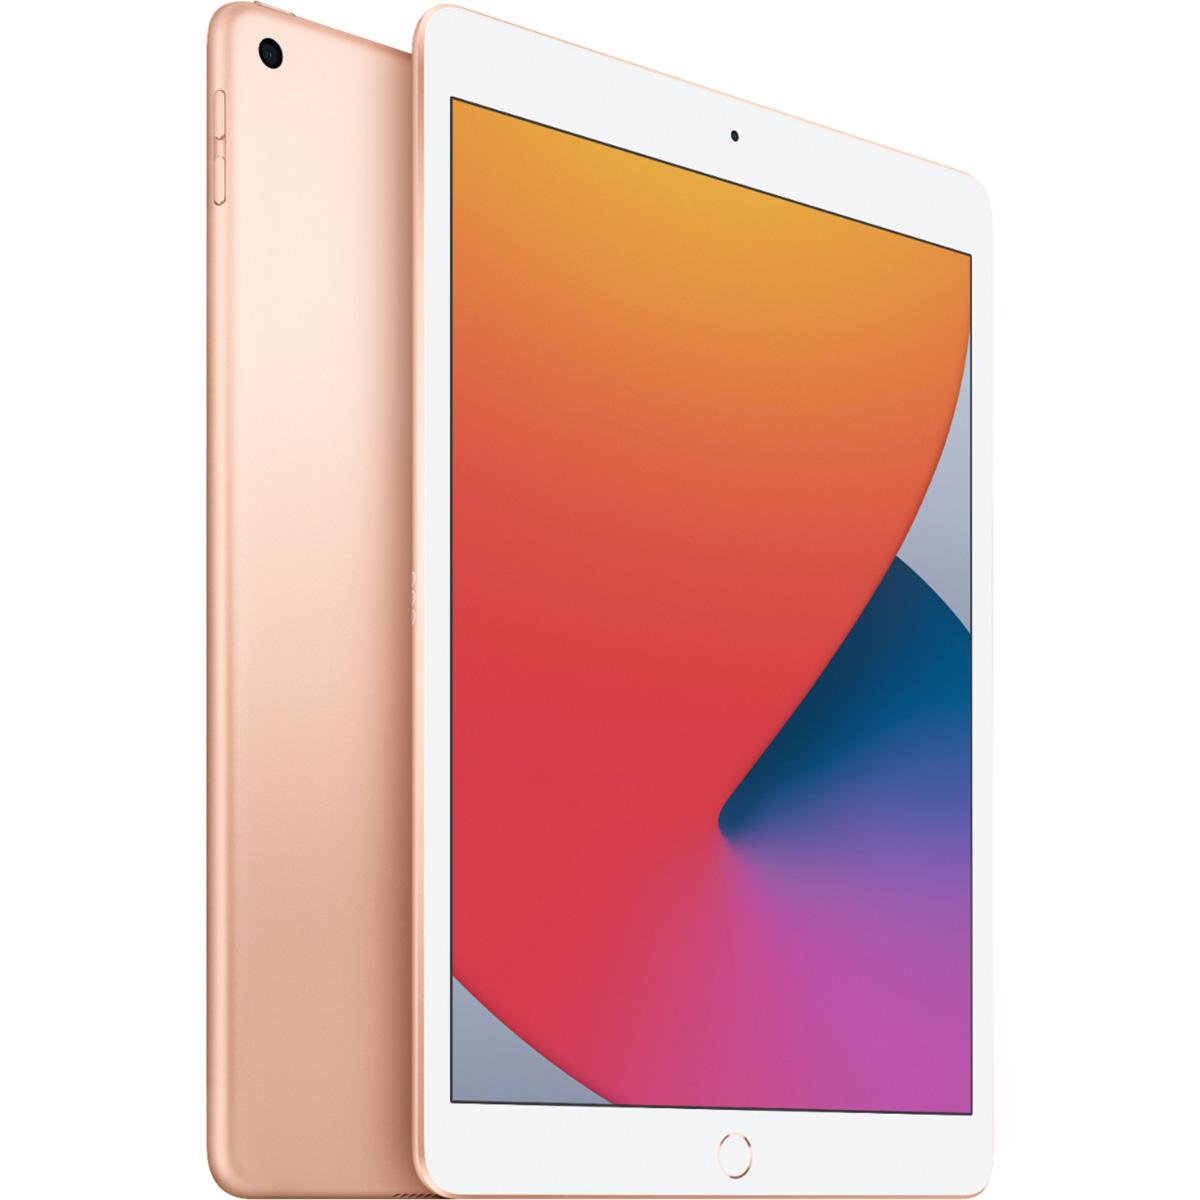 128GB Apple iPad 8th Gen 10.2in Wifi Tablet for $379.99 Shipped